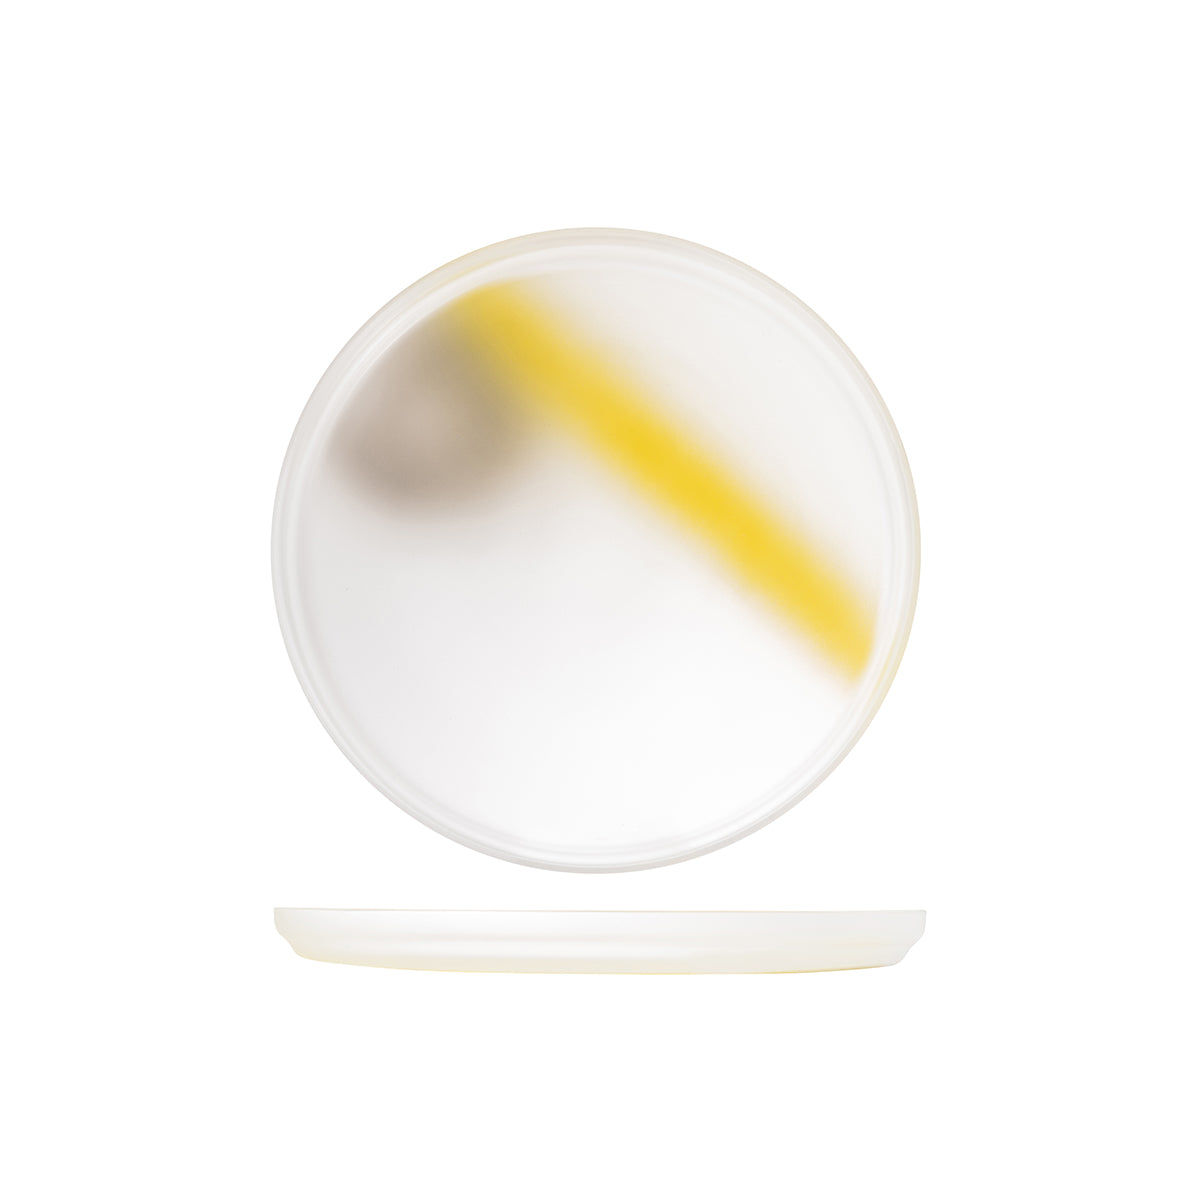 Glass Plate - 280mm, Yellow-Grey, Pigmento from Nude. made out of Glass and sold in boxes of 6. Hospitality quality at wholesale price with The Flying Fork! 